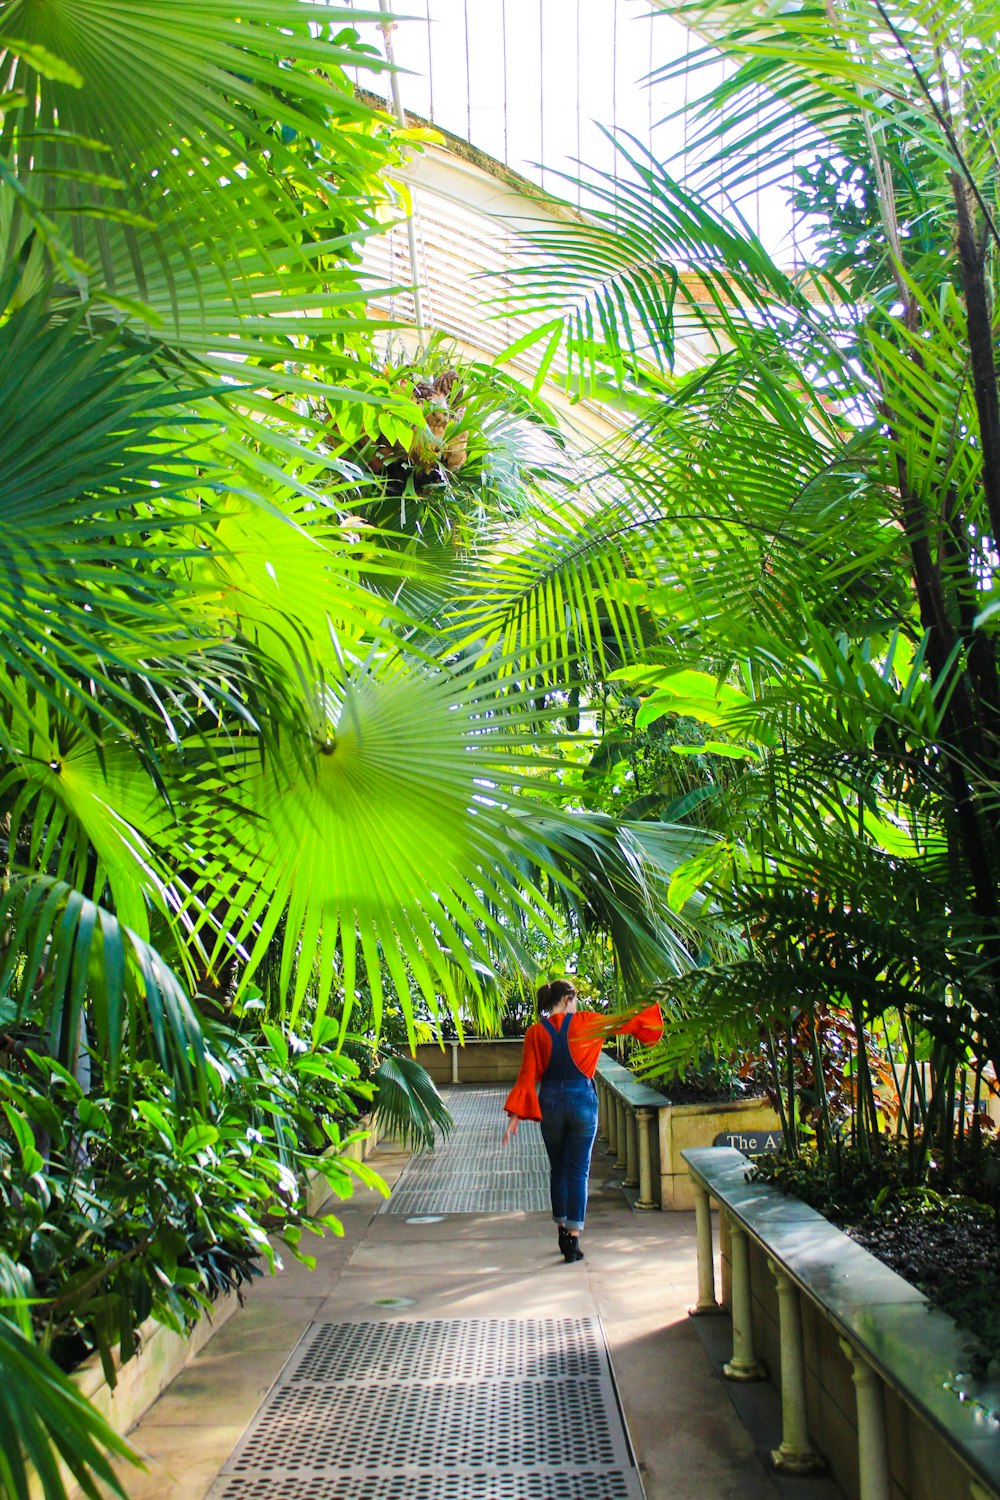 woman in red dress walking on pathway surrounded by palm trees